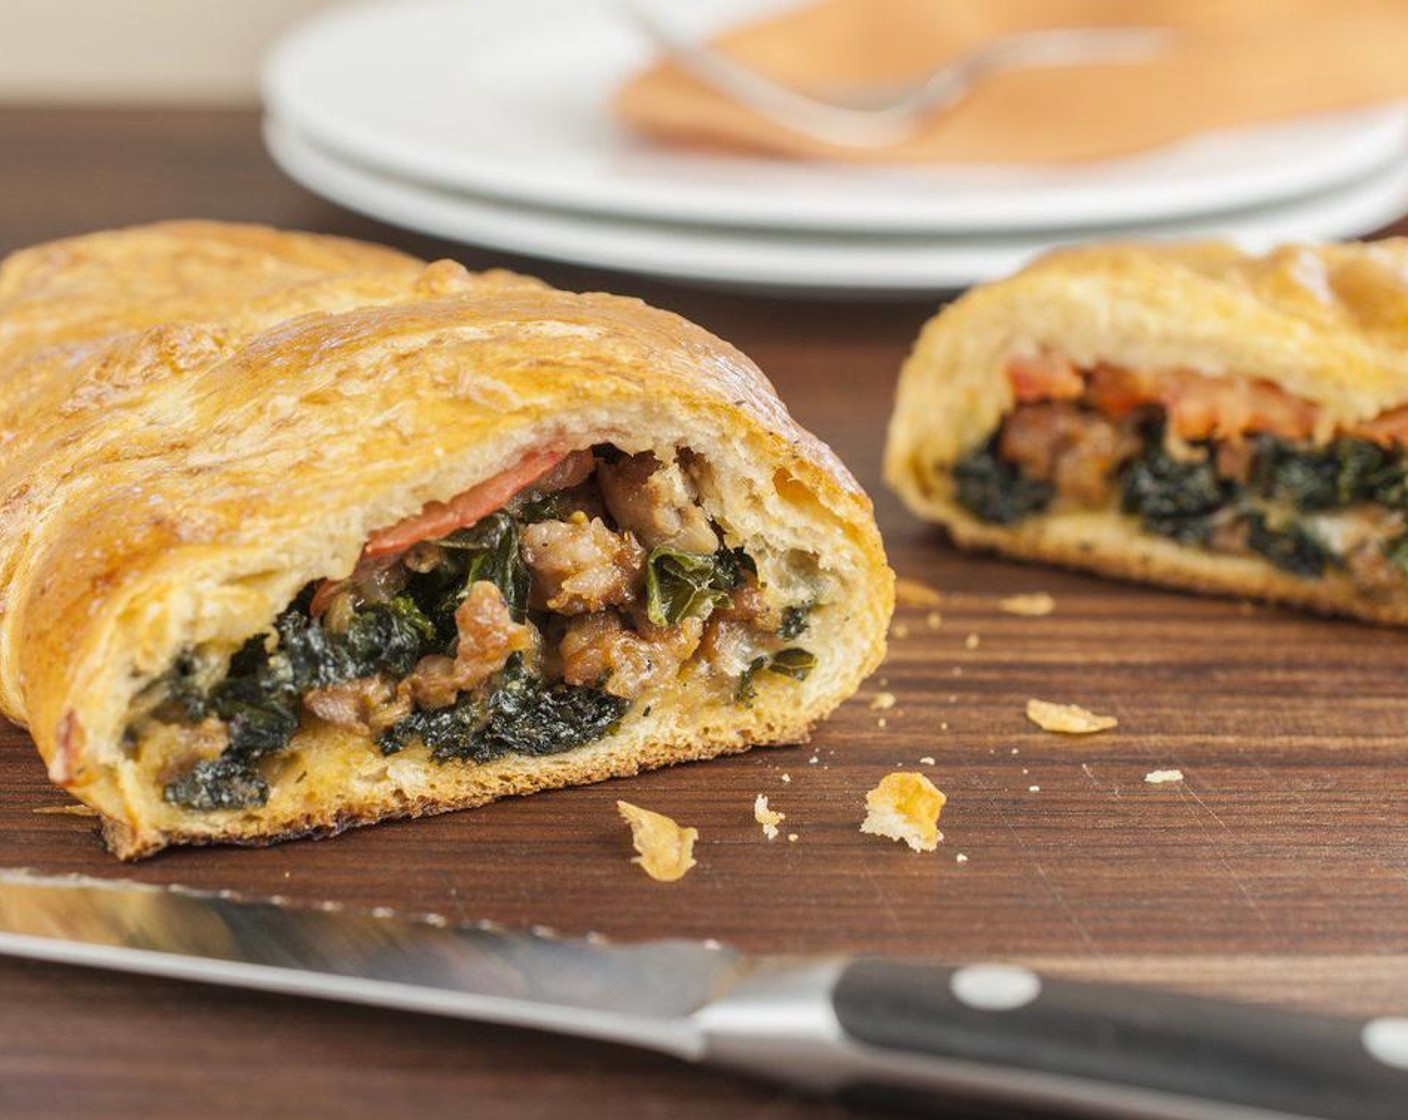 Kale and Sausage Pastry Roll